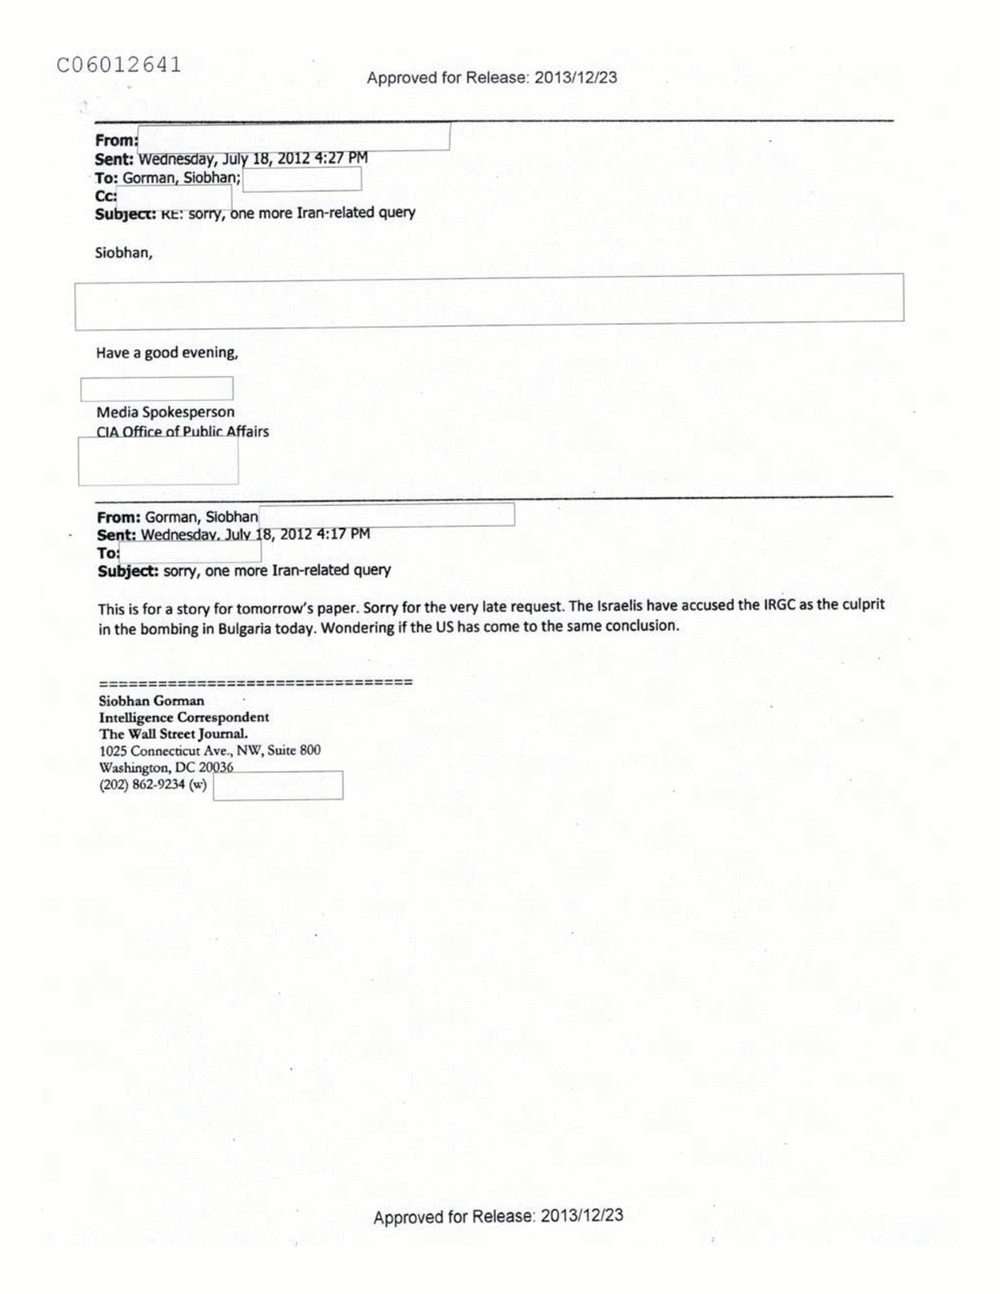 Page 208 from Email Correspondence Between Reporters and CIA Flacks